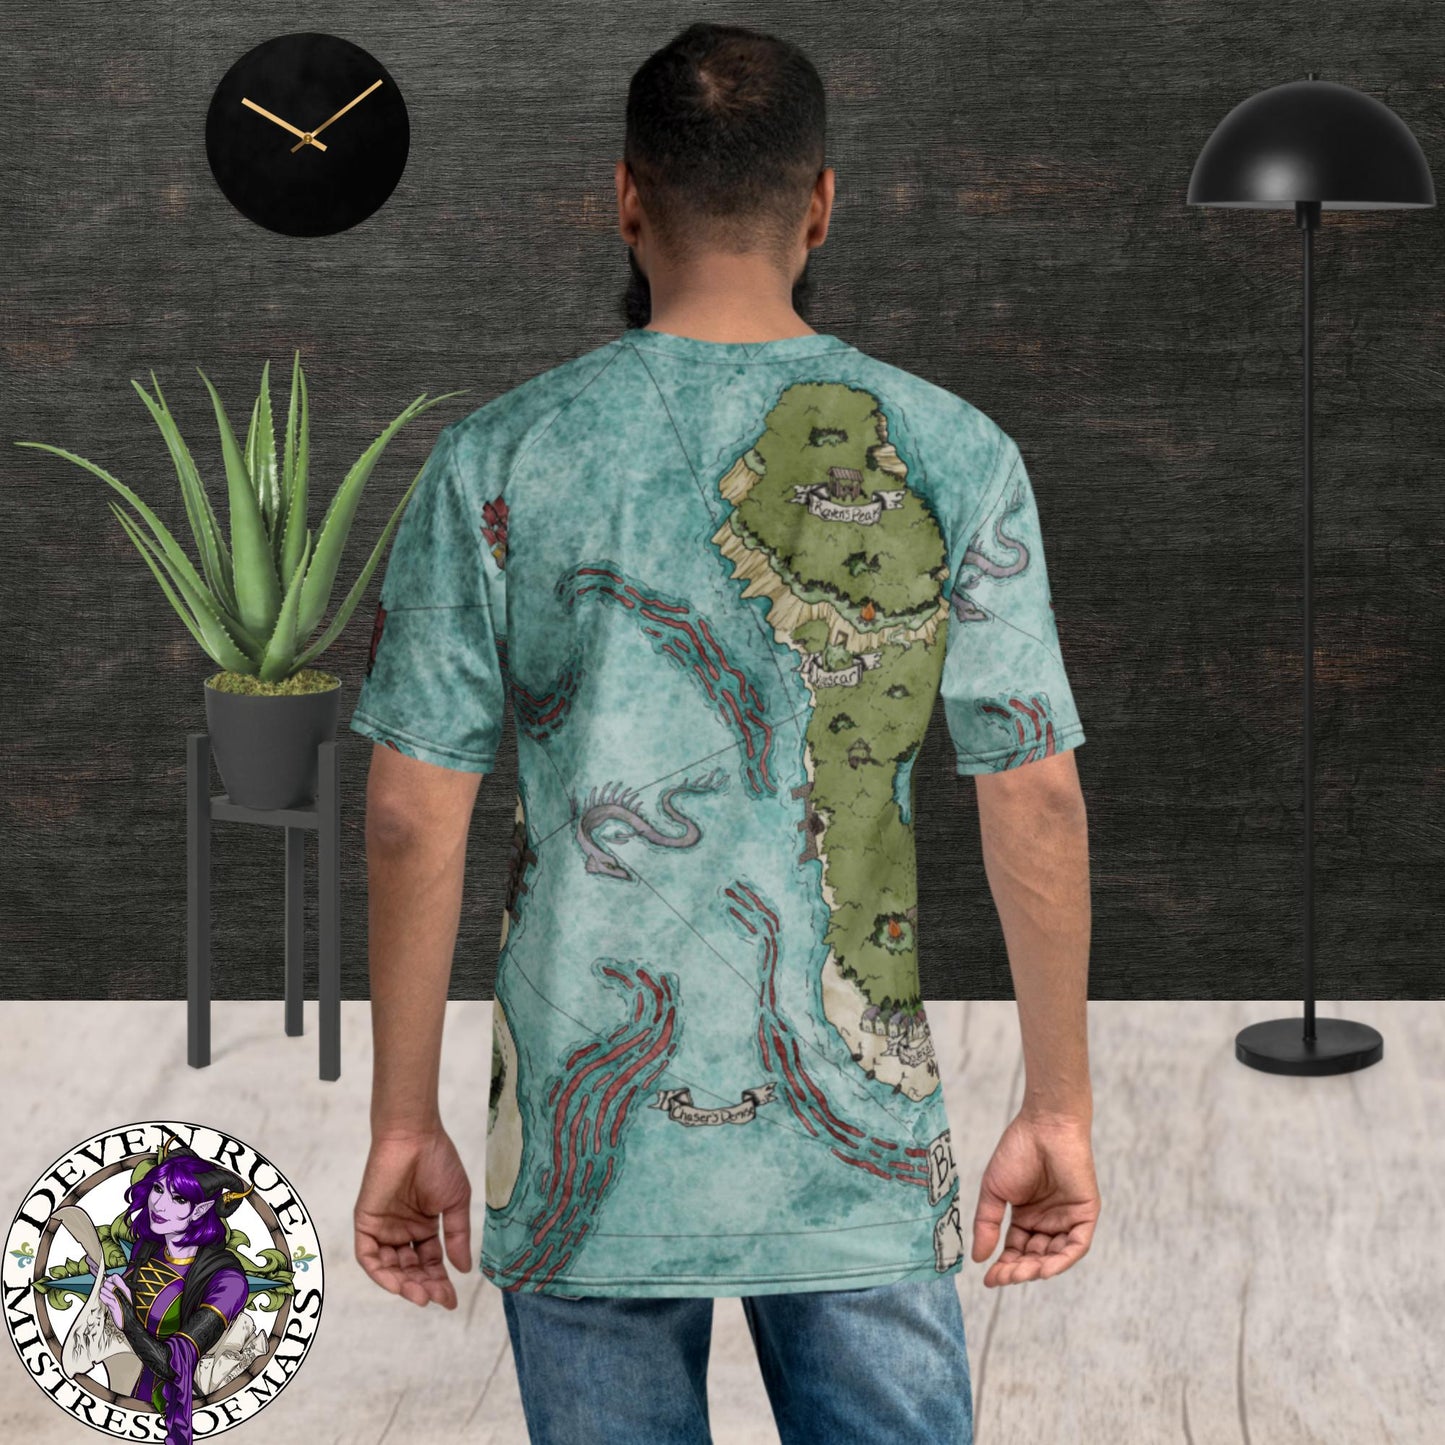 Back view of the Blood Reef Isle tee shirt.